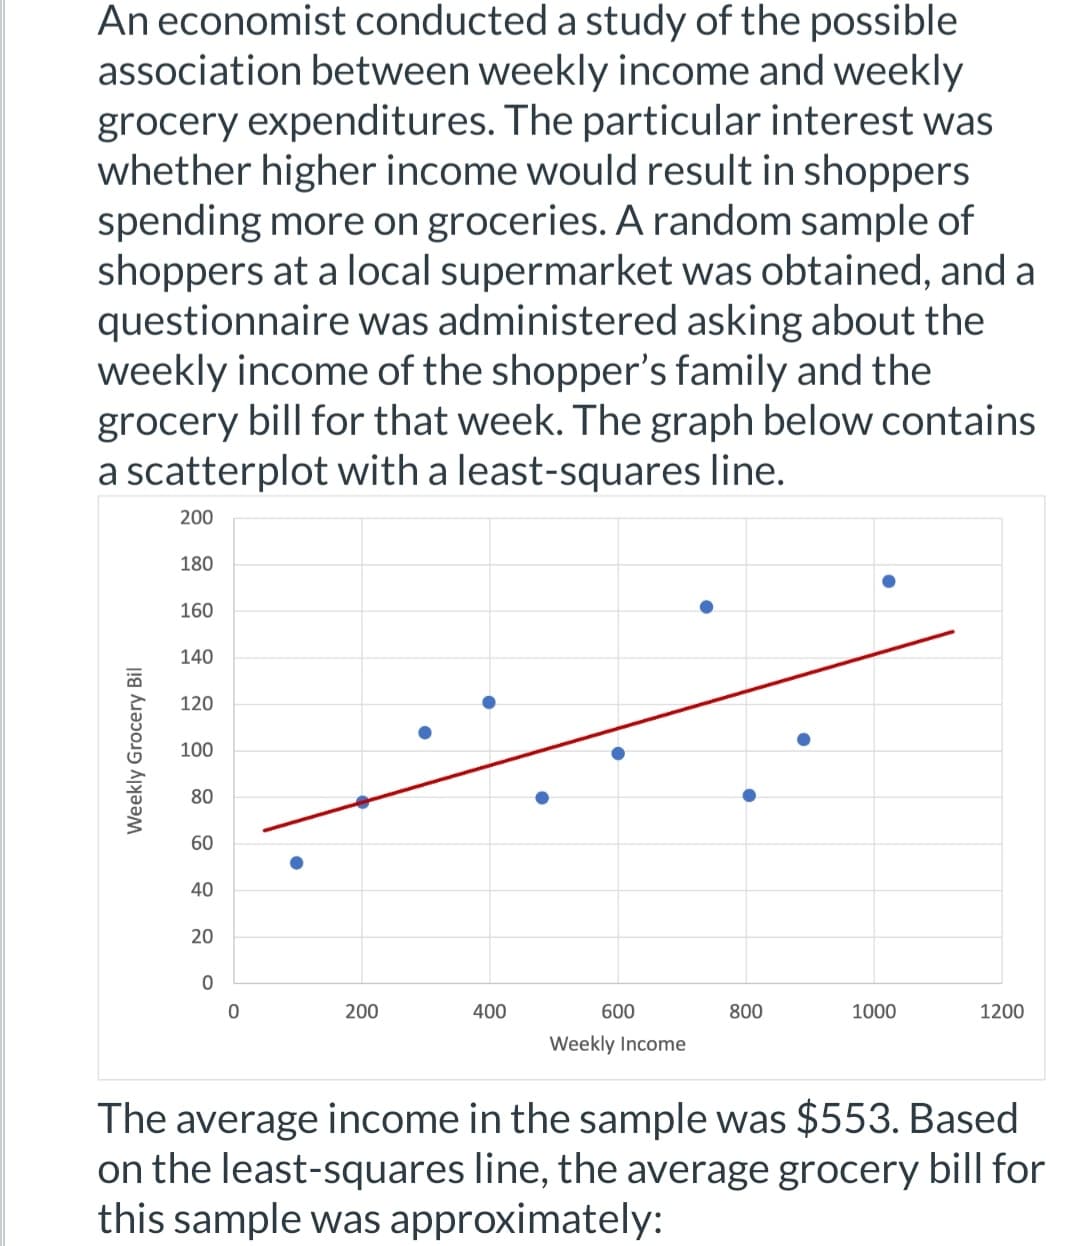 An economist conducted a study of the possible
association between weekly income and weekly
grocery expenditures. The particular interest was
whether higher income would result in shoppers
spending more on groceries. A random sample of
shoppers at a local supermarket was obtained, and a
questionnaire was administered asking about the
weekly income of the shopper's family and the
grocery bill for that week. The graph below contains
a scatterplot with a least-squares line.
200
180
160
140
120
100
80
60
40
20
0
0
200
400
600
800
1000
1200
Weekly Income
The average income in the sample was $553. Based
on the least-squares line, the average grocery bill for
this sample was approximately:
Weekly Grocery Bil